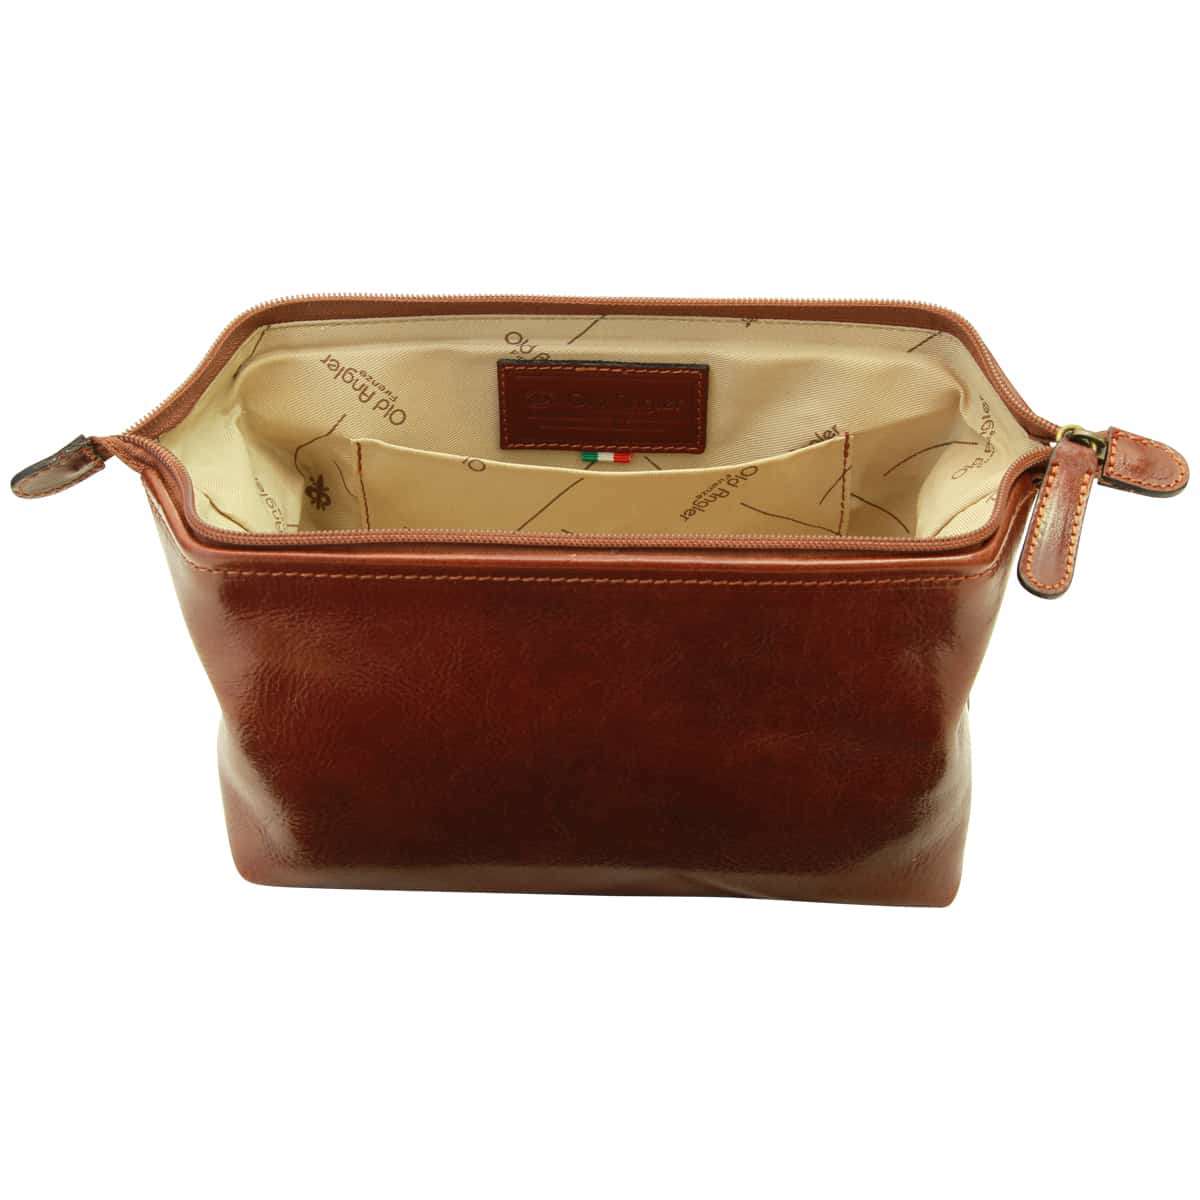 Cowhide beauty case - Brown | 401205MA | EURO | Old Angler Firenze